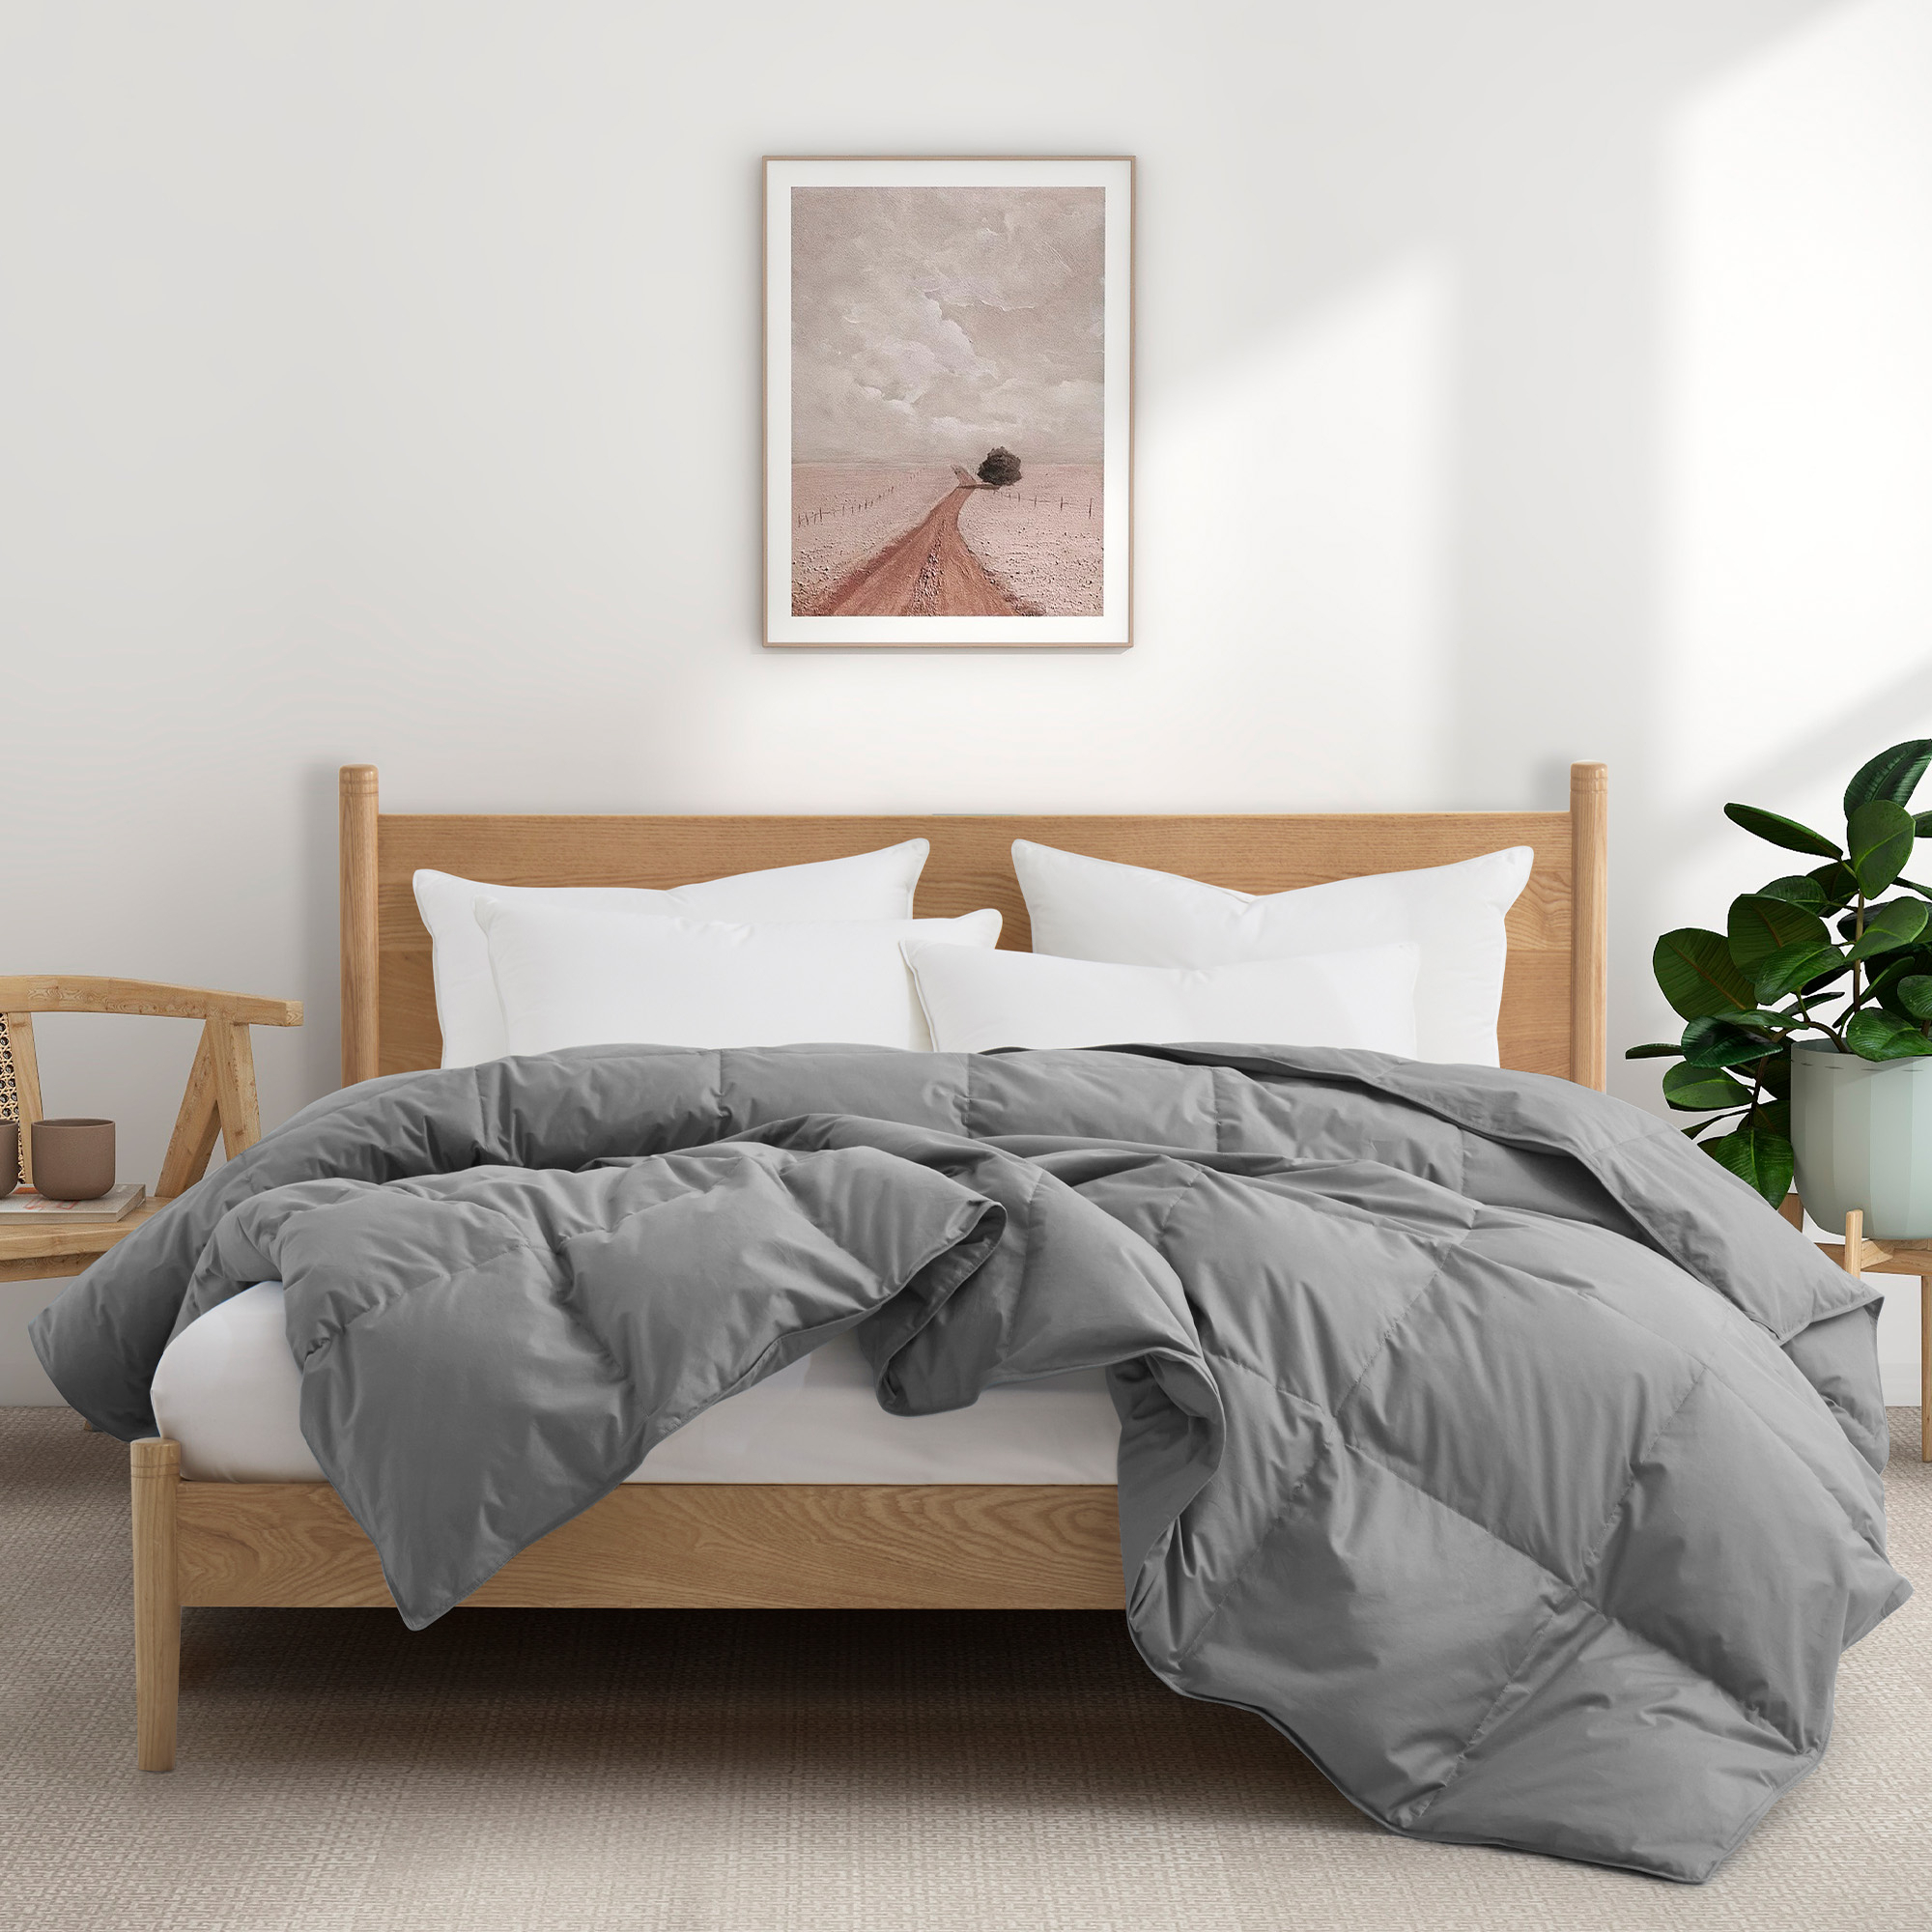 All Season Organic Cotton Comforter Filled With Down And Feather Fiber - Gray, Full/Queen